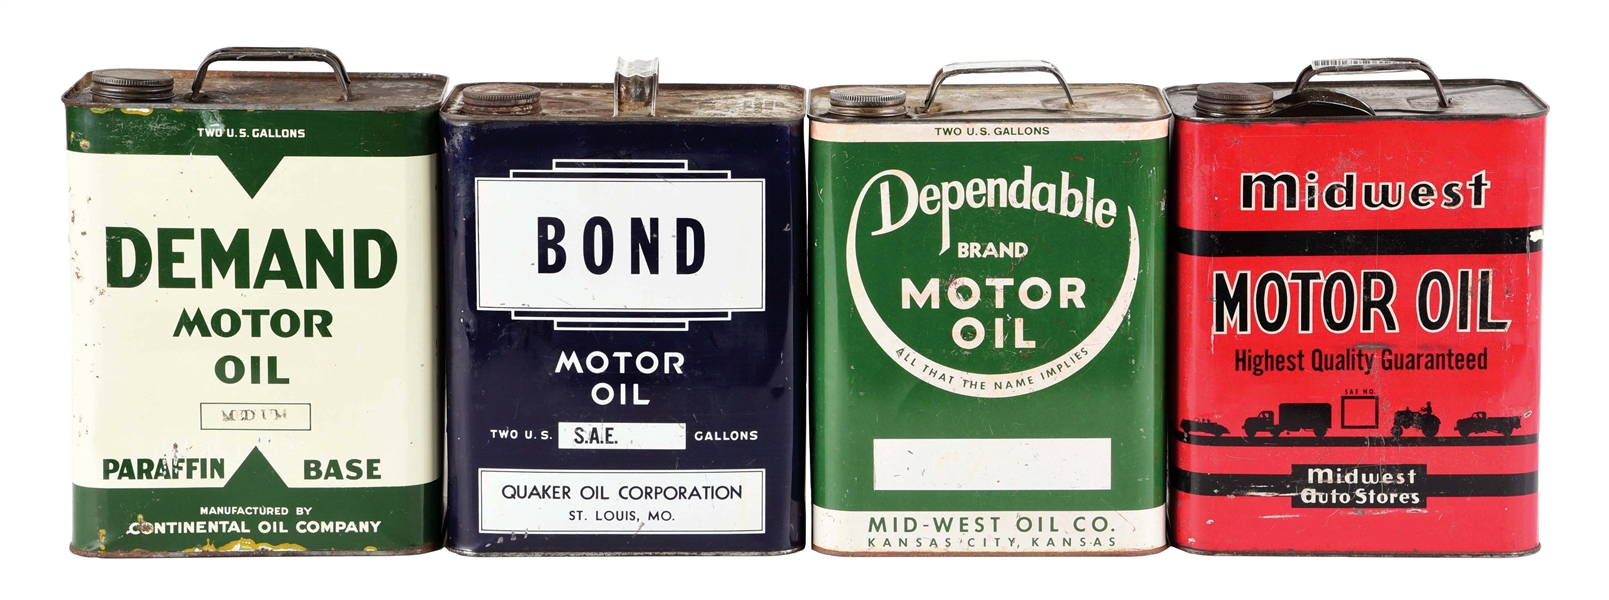 LOT OF 4: TWO GALLON OIL CANS FROM MIDWEST, DEPENDABLE, DEMAND & BOND MOTOR OILS. 